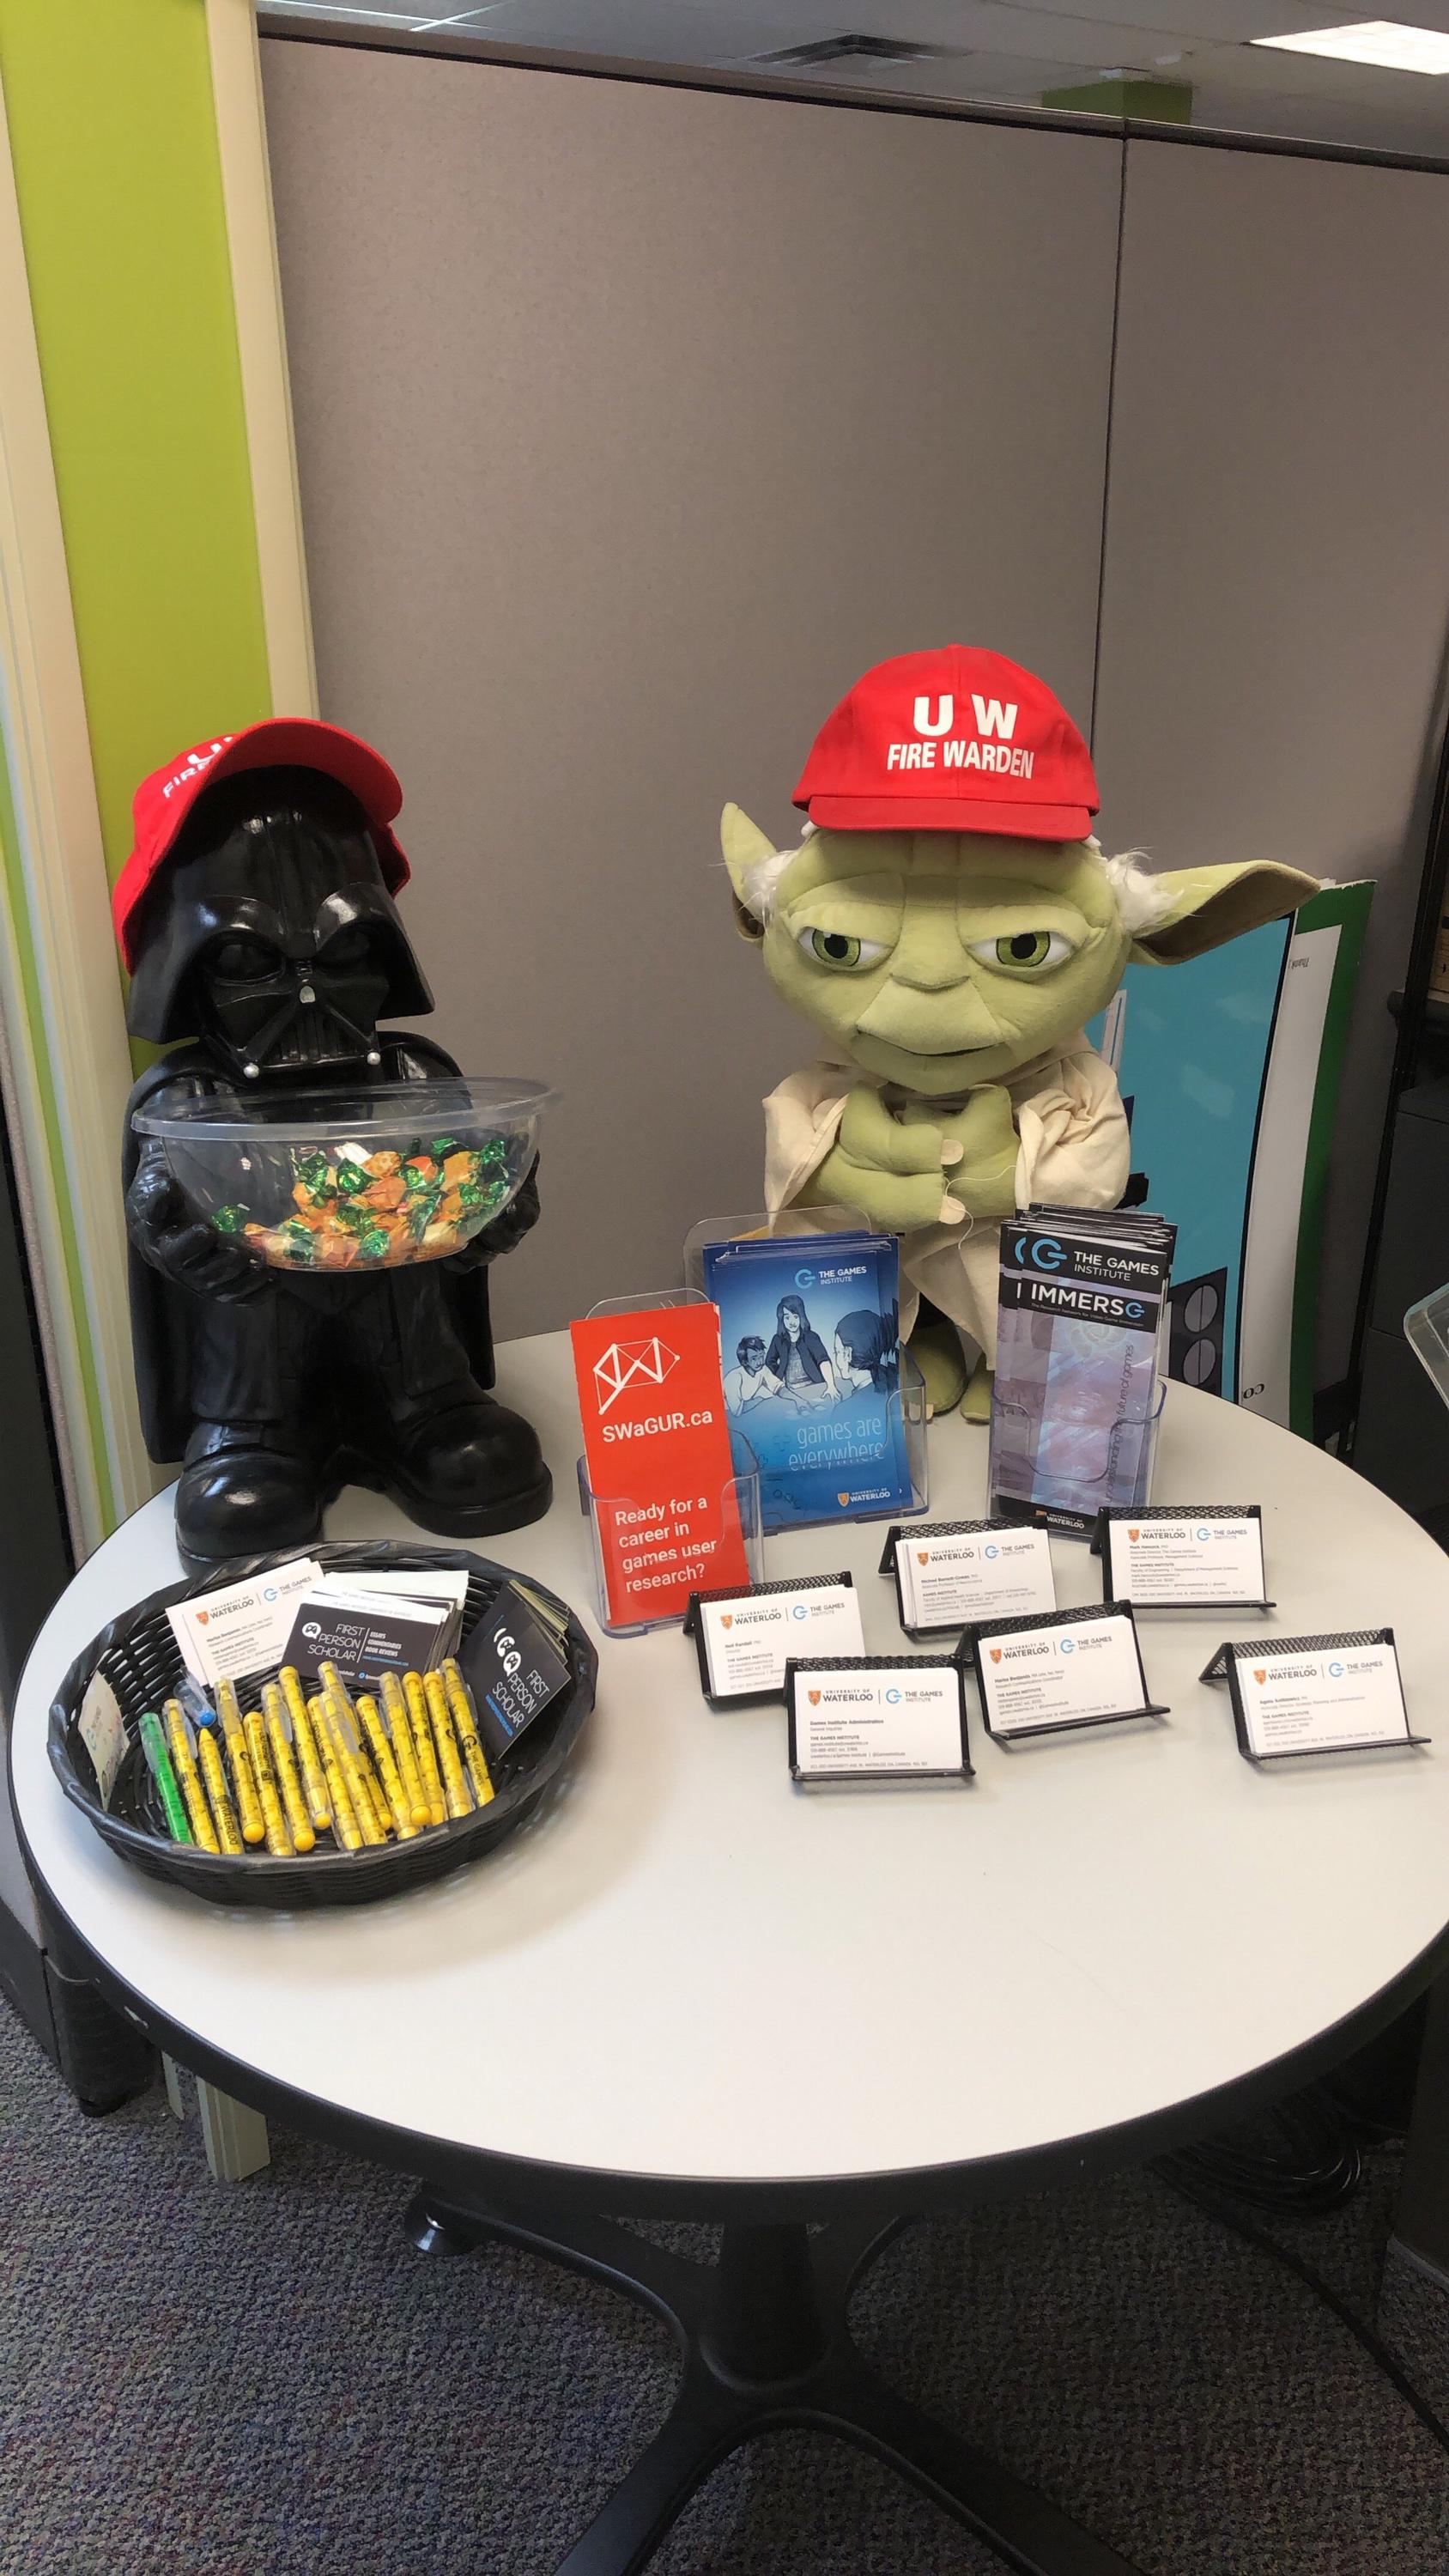 Darth Vader and Yoda sitting on welcome desk with pens and business cards